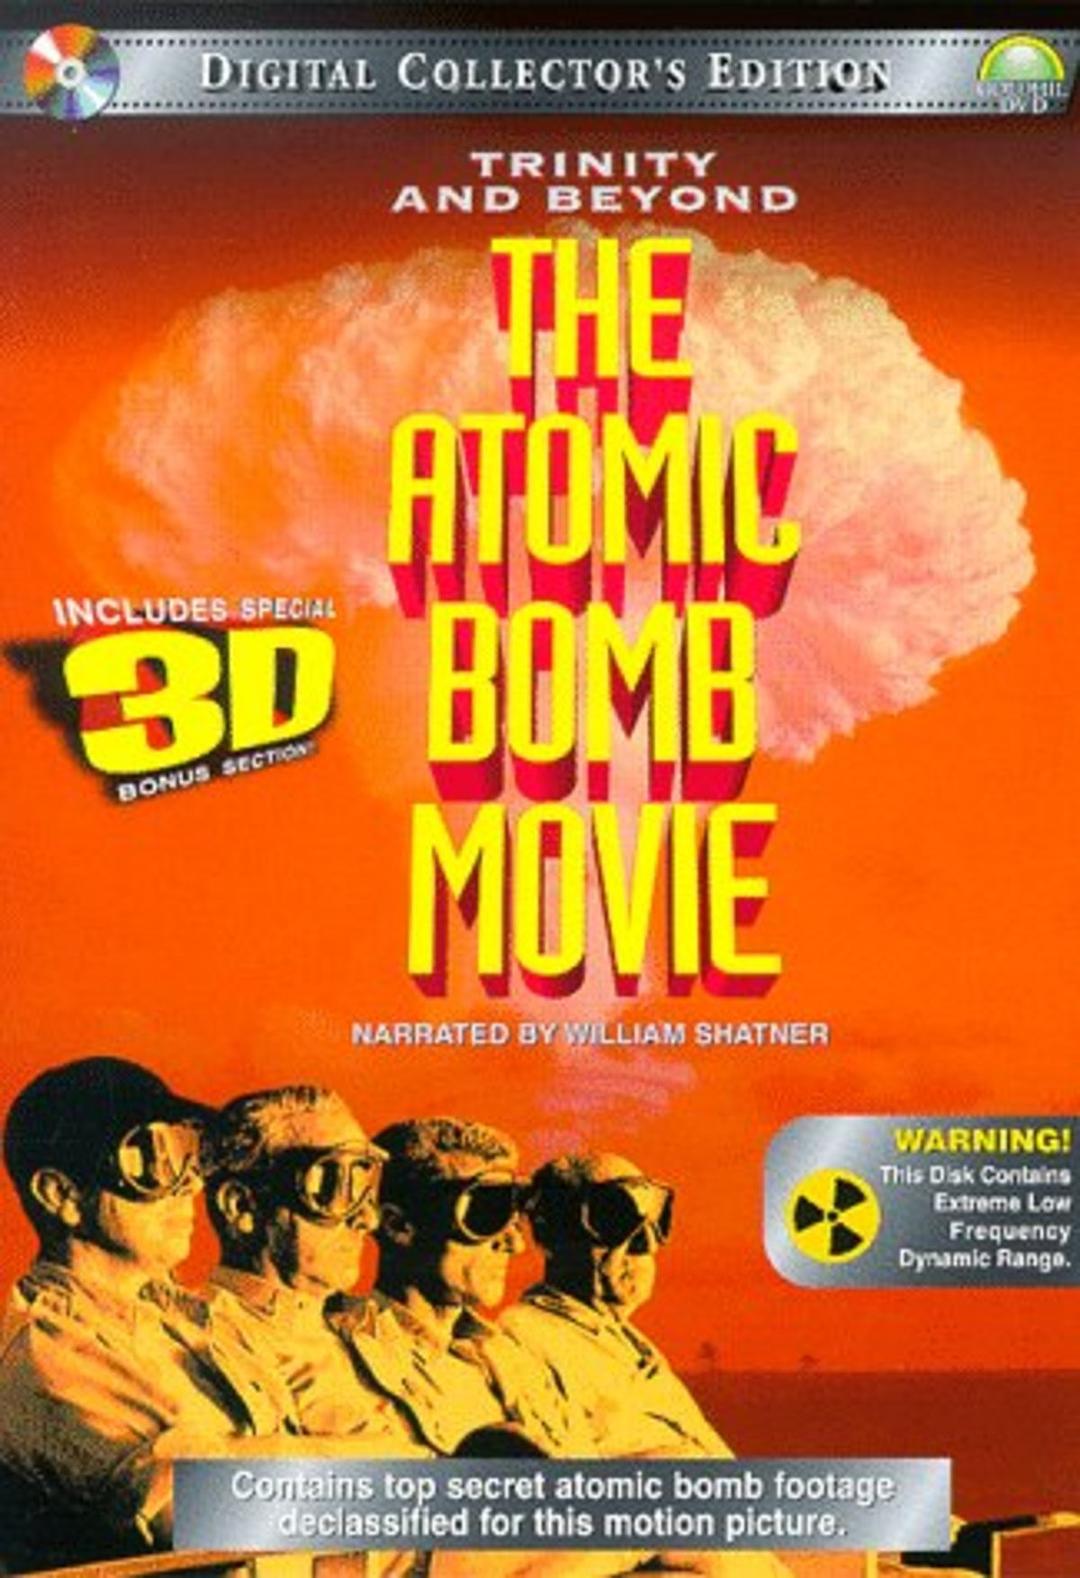 ˱ Trinity.And.Beyond.The.Atomic.Bomb.Movie.1995.1080p.BluRay.x264-SSF 6.56GB-1.png